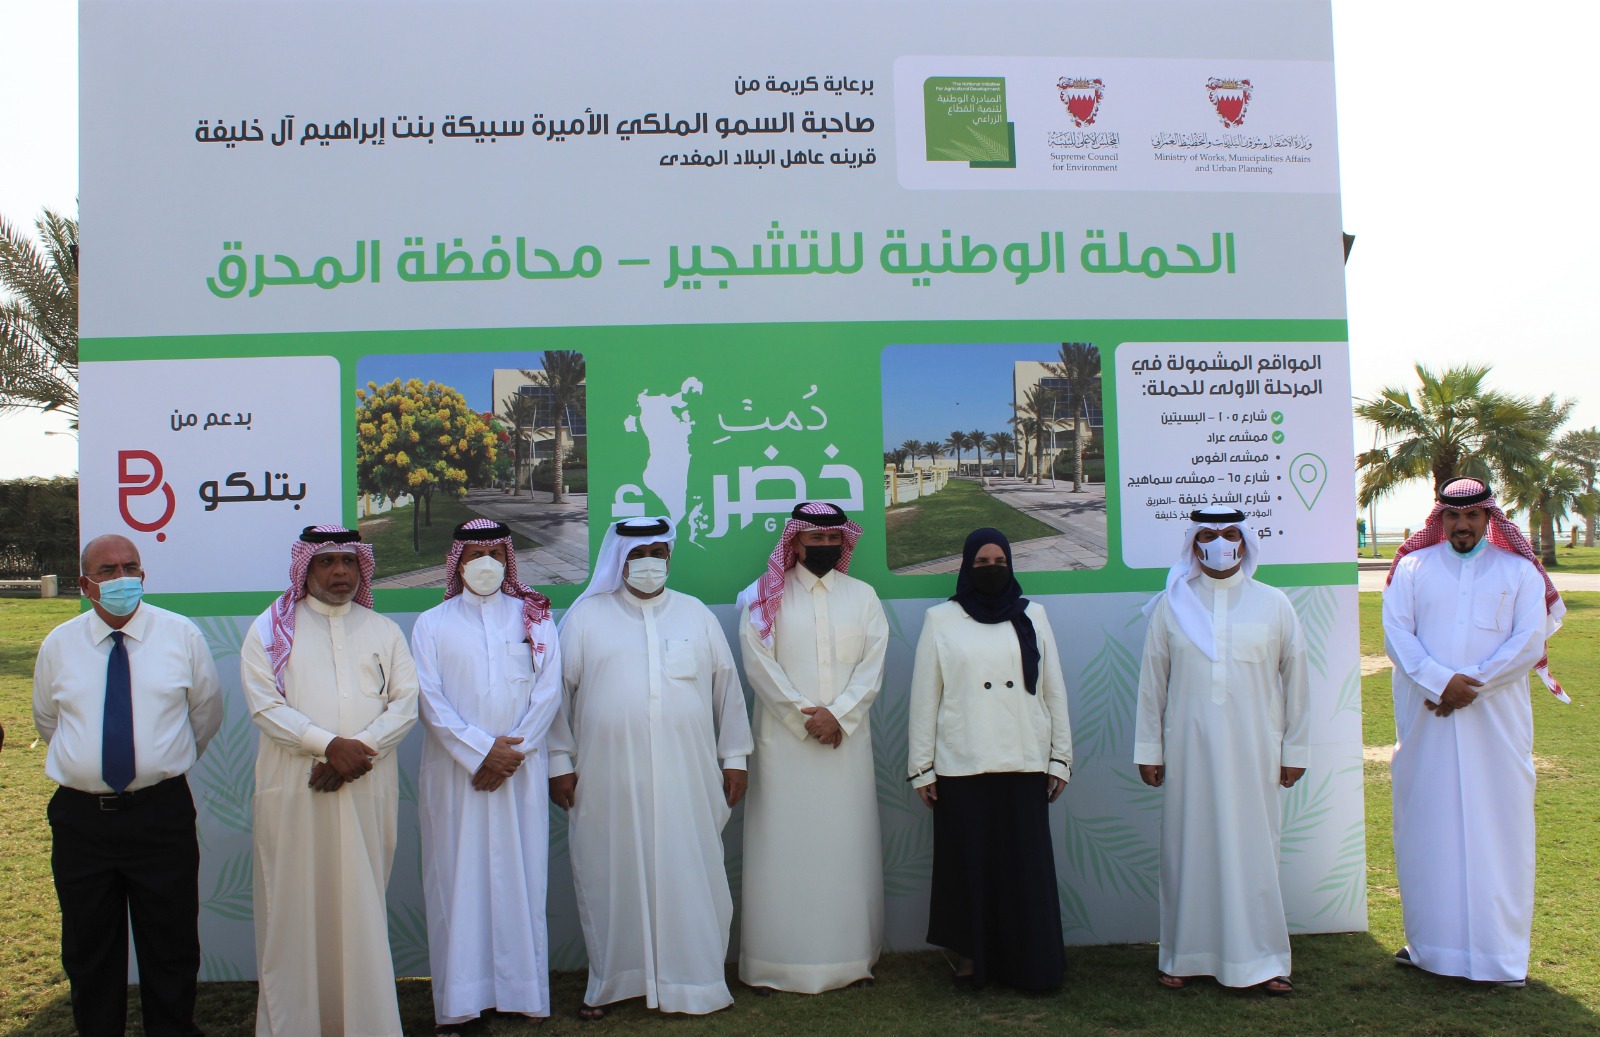 NIAD takes Forever Green campaign to Al Istiqlal, and Arad walkways with support from Batelco, Zain